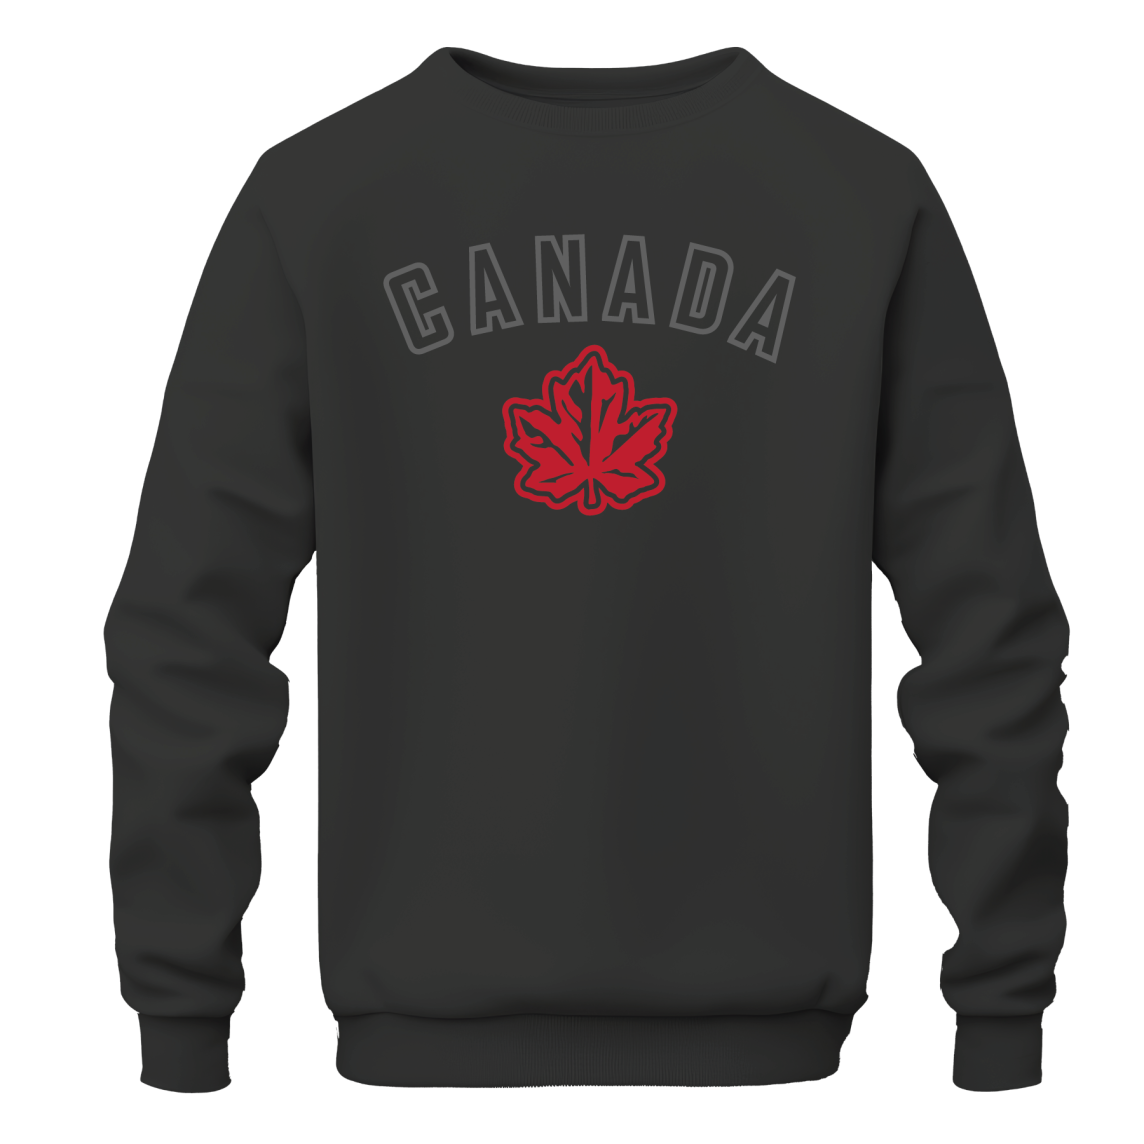 OCG Sweatshirt with Canada Maple Leaf Emblem embroidered Full Front on Black